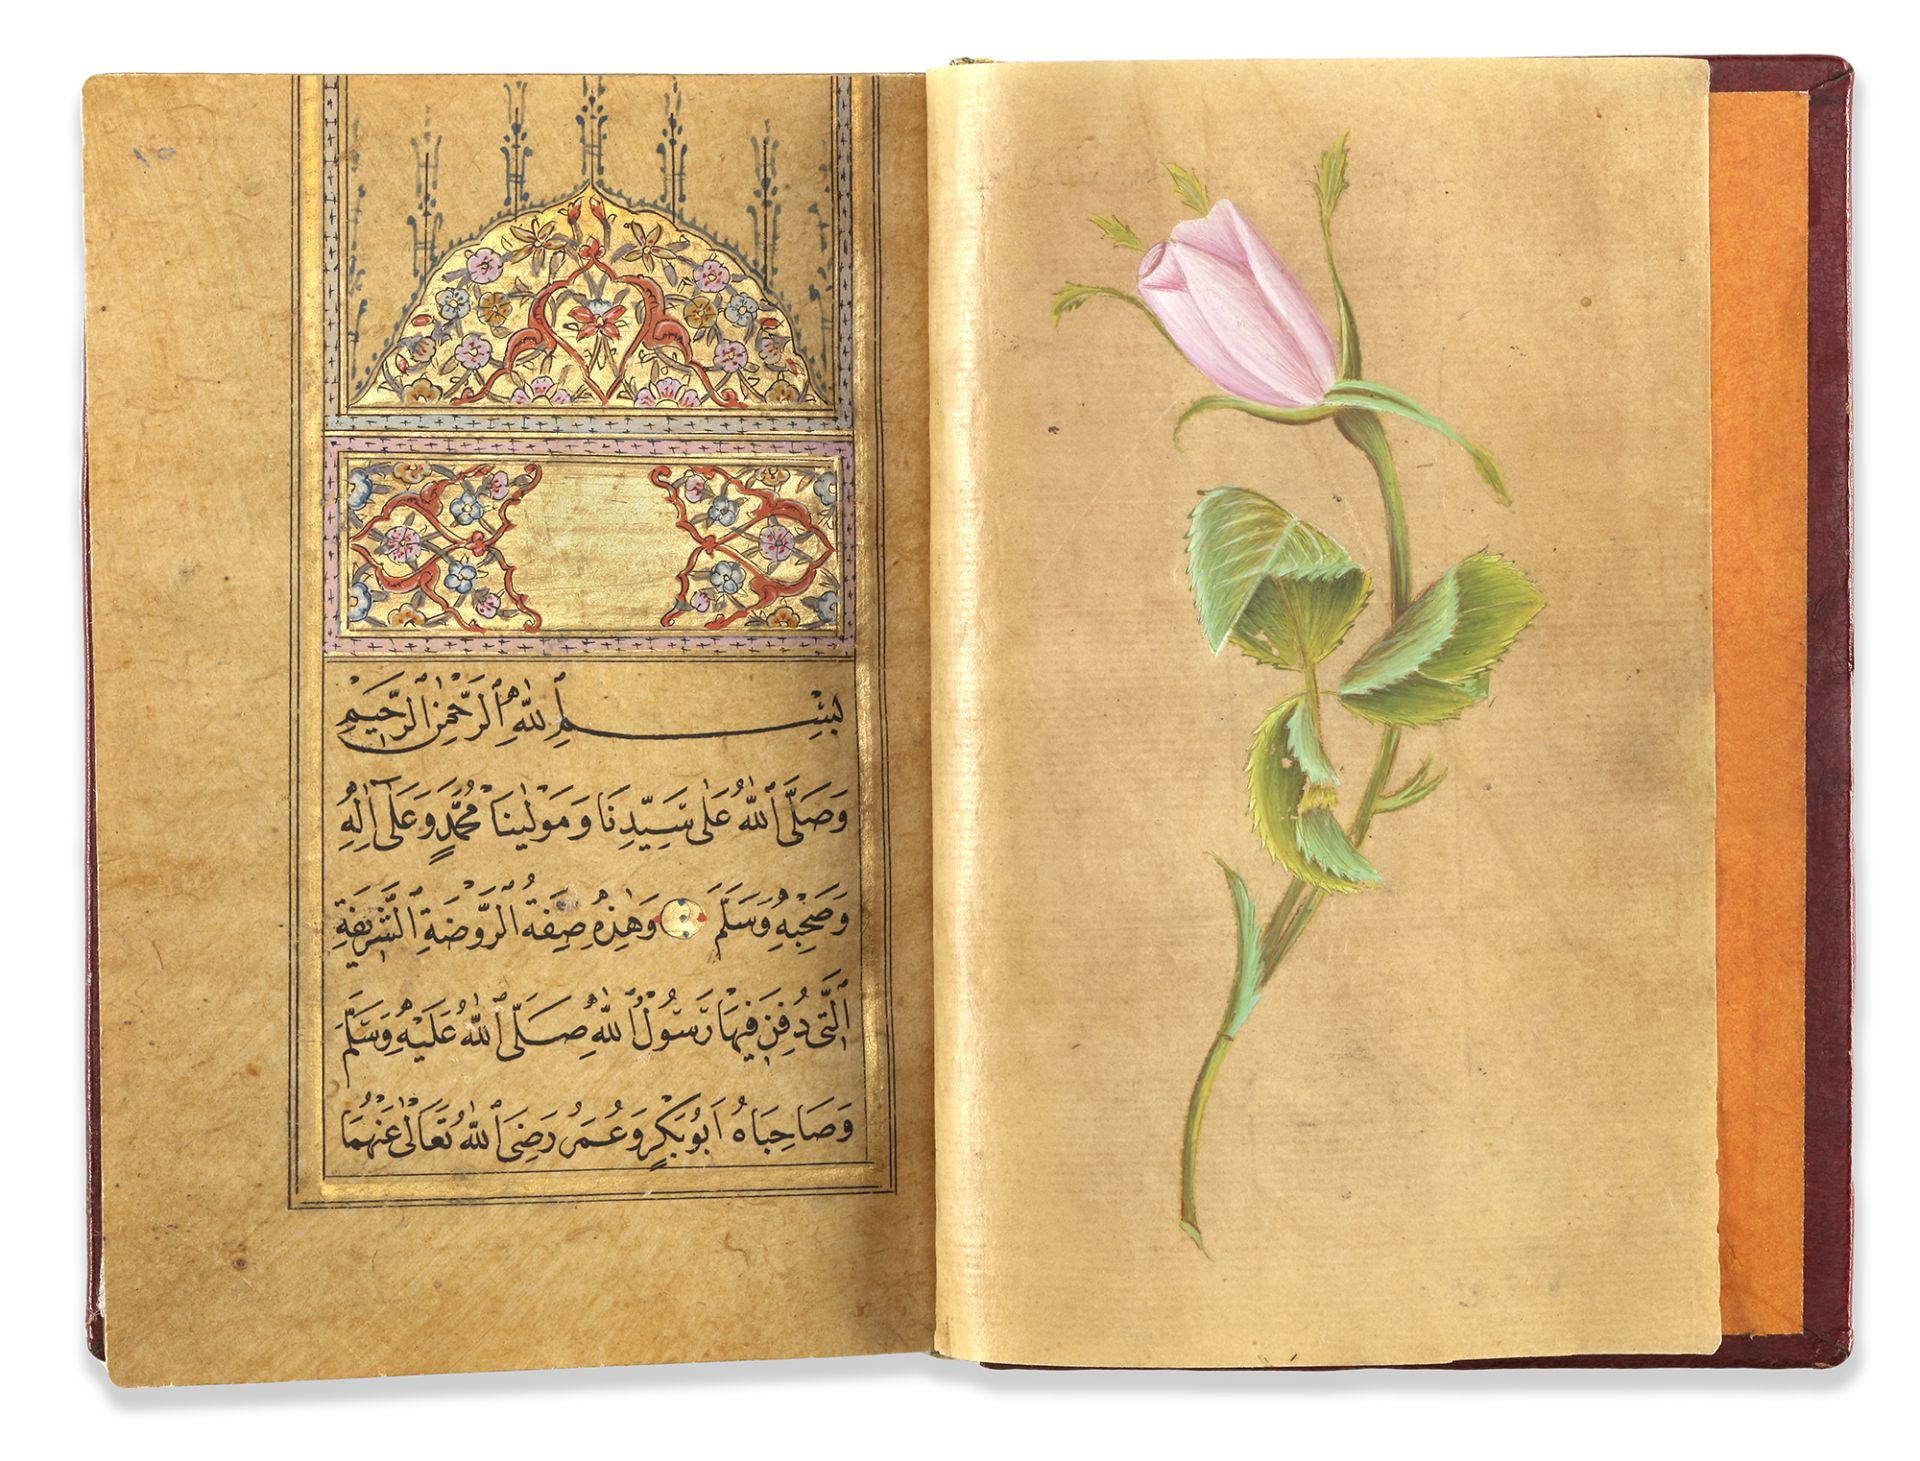 AN OTTOMAN PRAYER BOOK SIGNED BY IBRAHIM BERBERZADE, TURKEY, DATED 1179 AH/1765 AD - Image 3 of 6